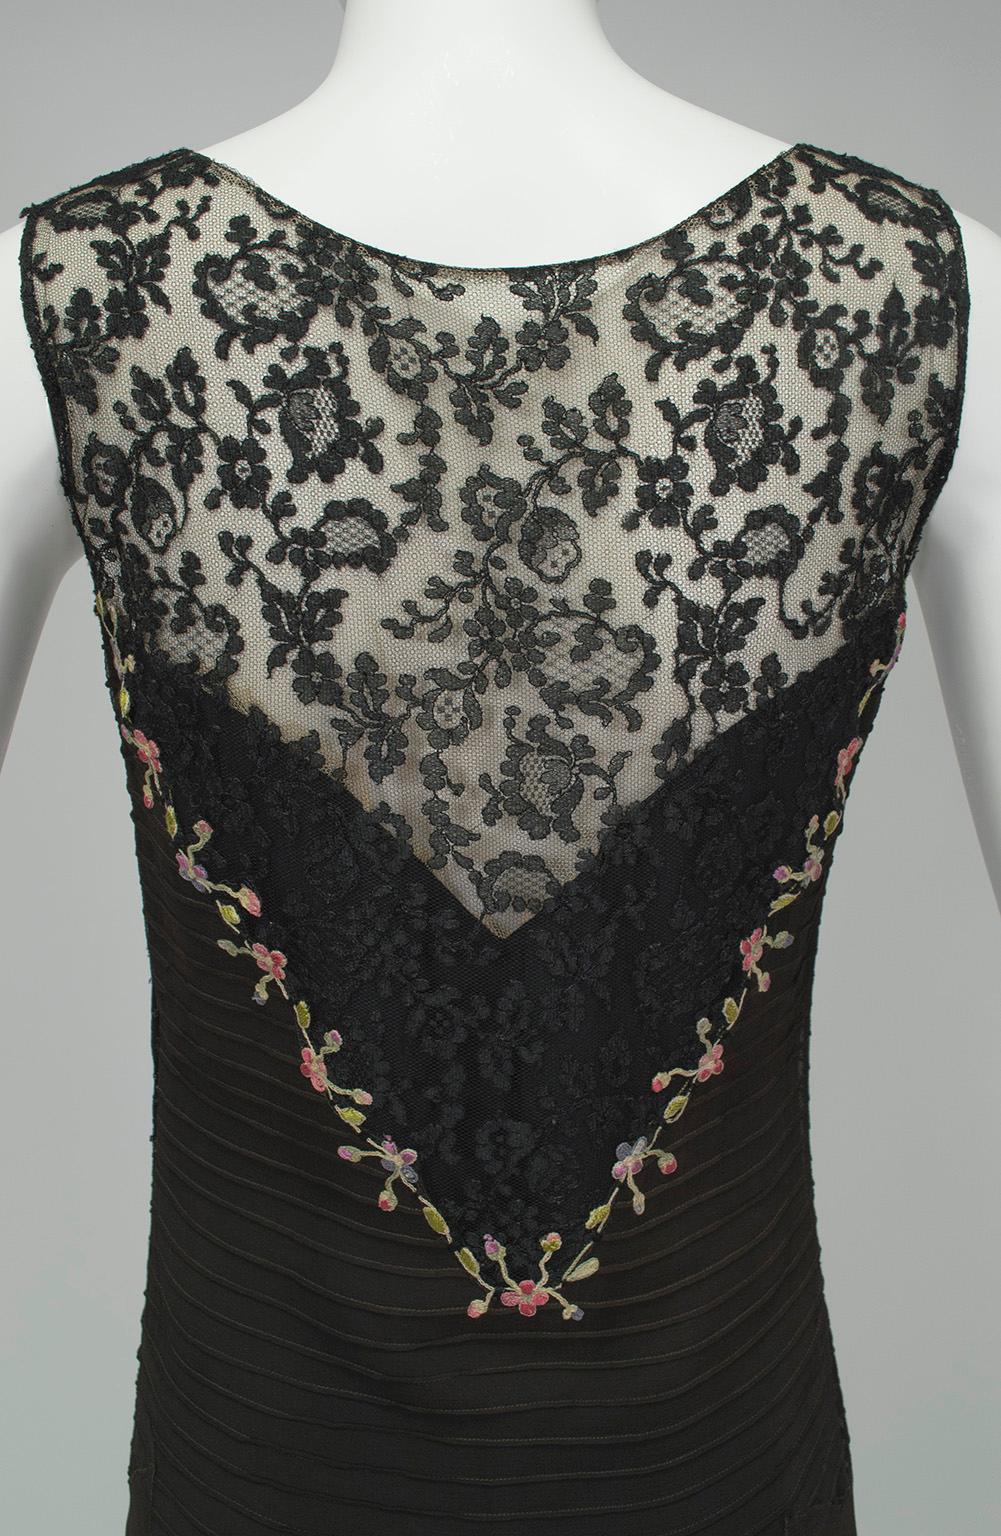 Women's Embroidered Drop Waist Trumpet Dress with Pintuck Illusion Bodice, 1920s